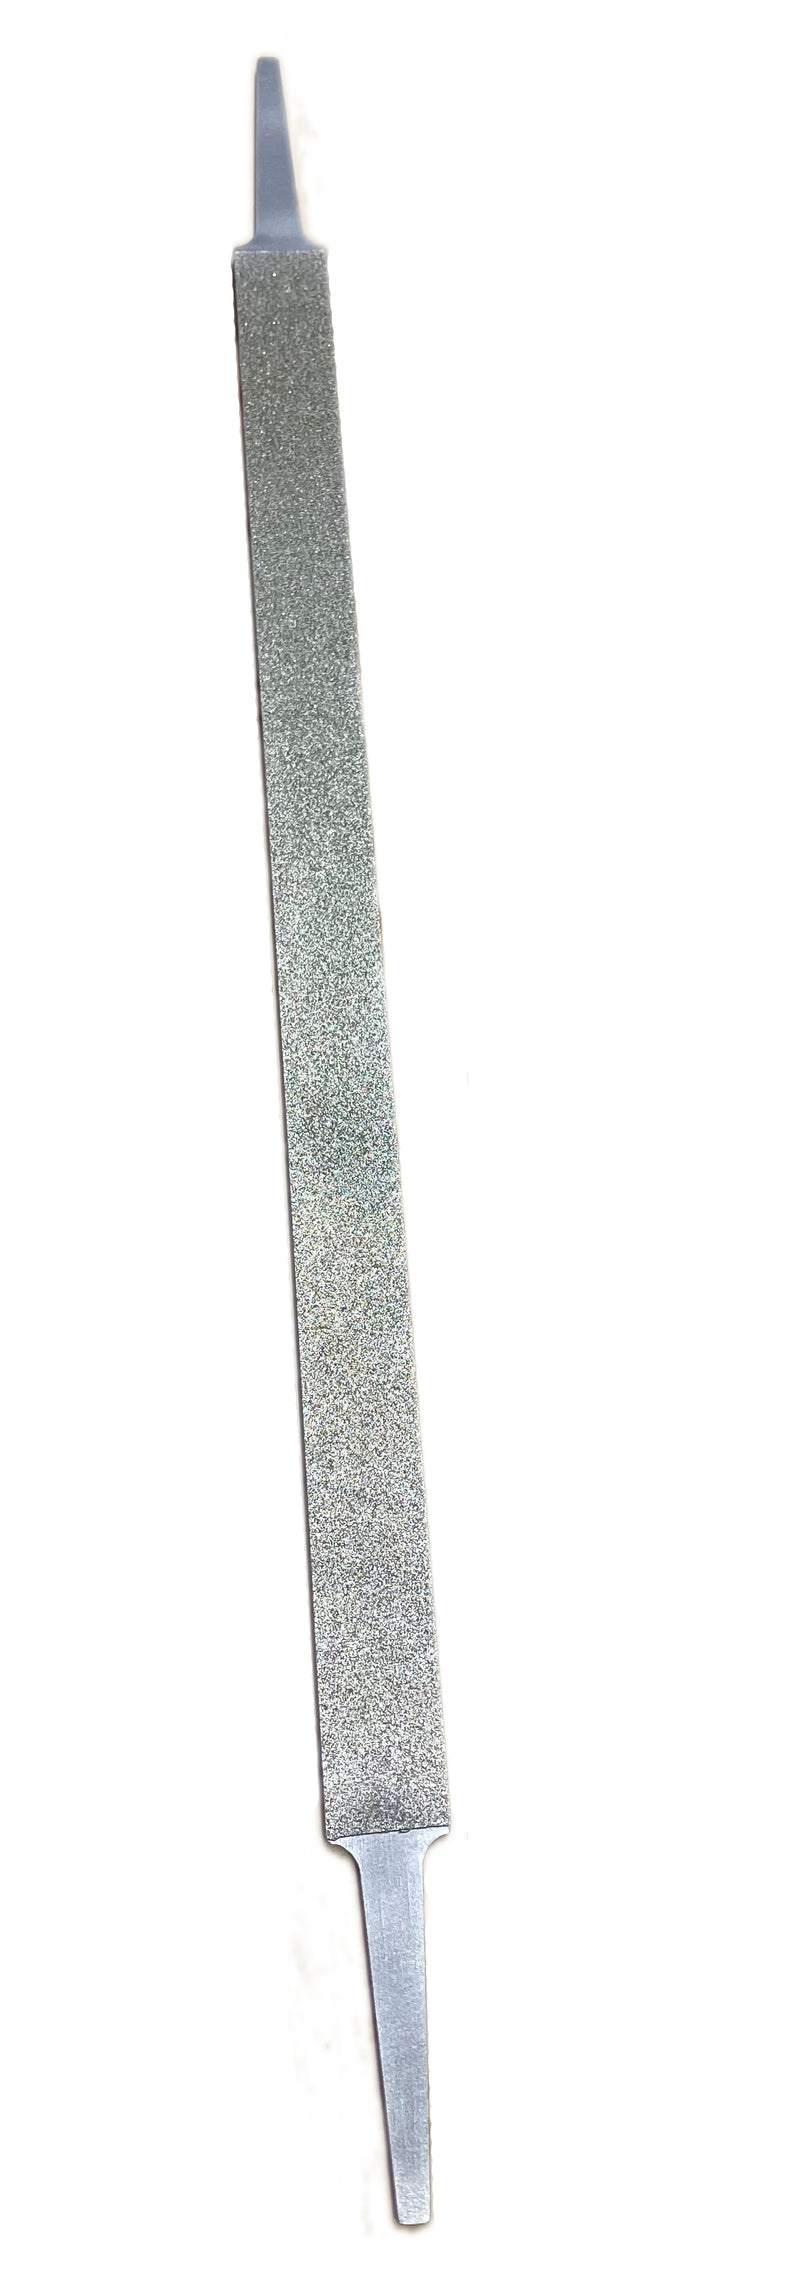 D80 Diamond File for Inserted Tooth Sawmill Saws